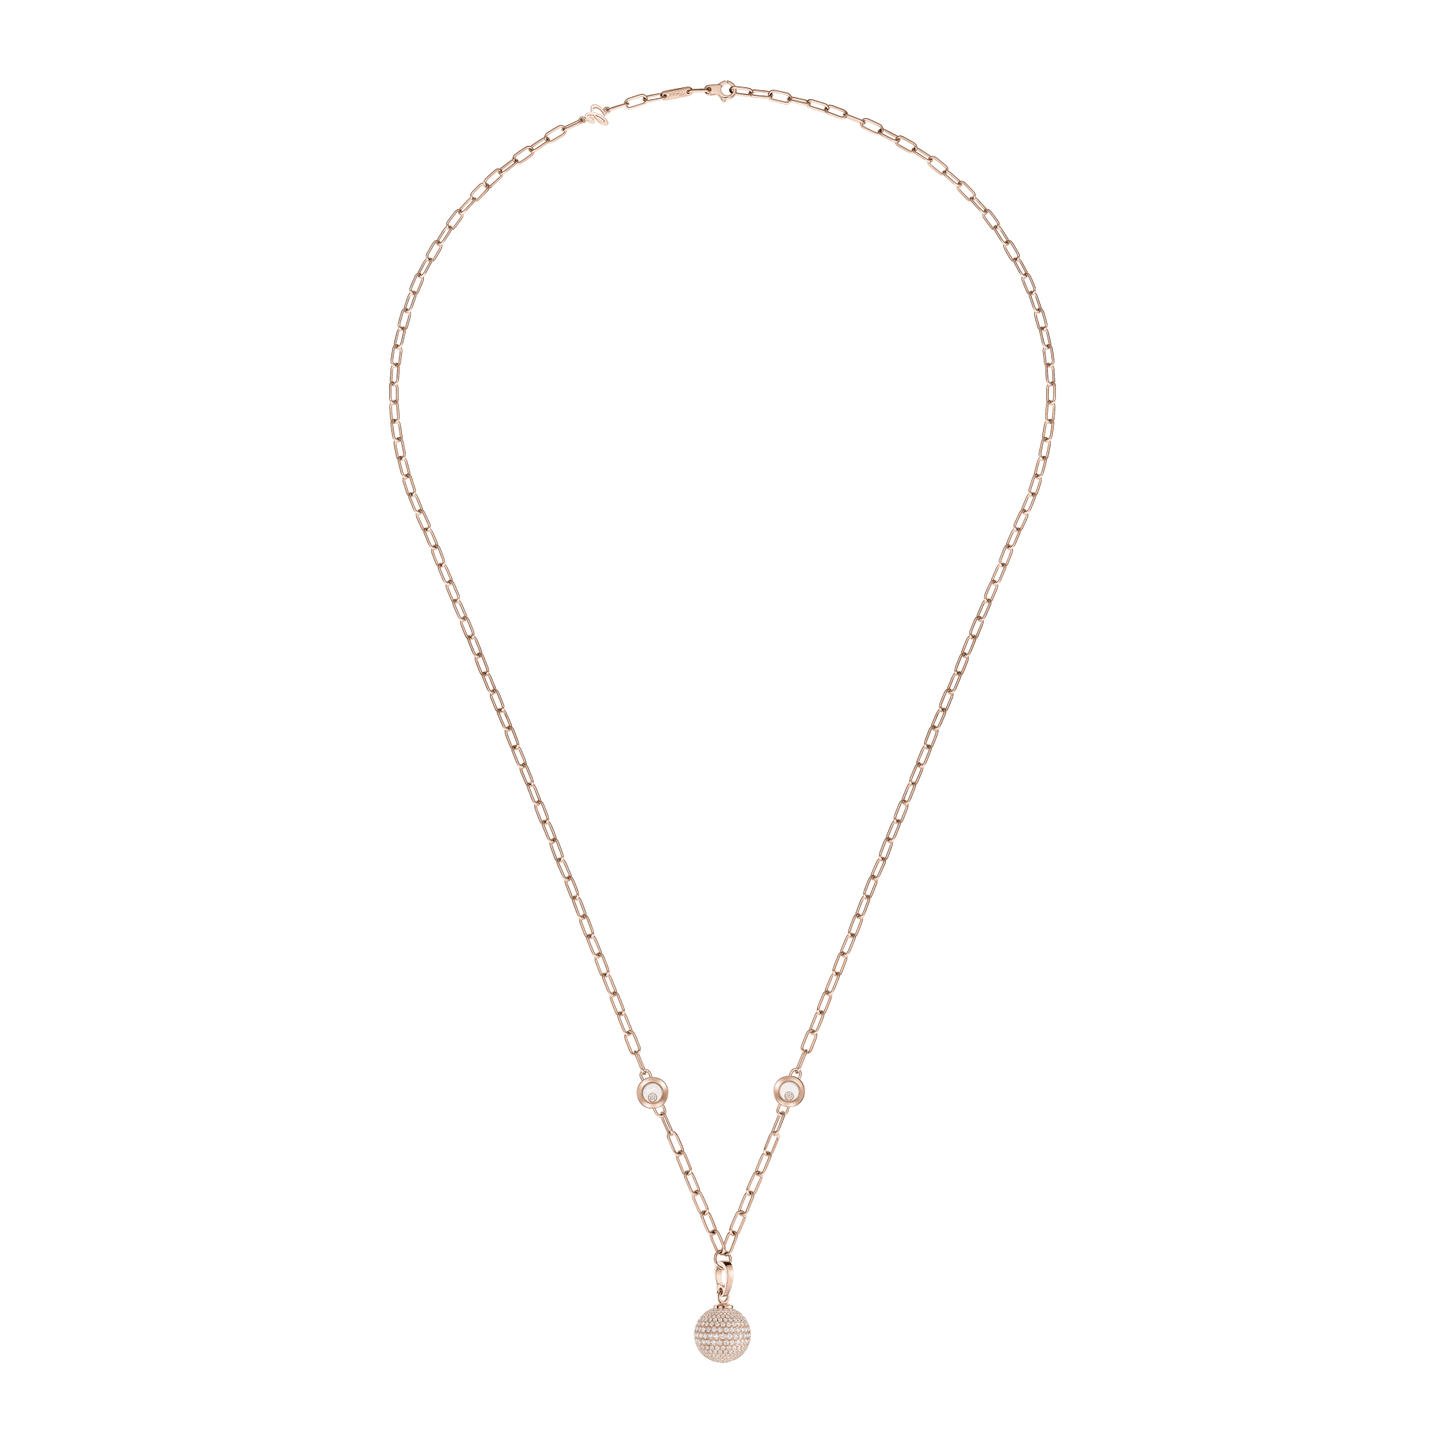 HAPPY DIAMONDS PLANET NECKLACE, ETHICAL ROSE GOLD, DIAMONDS 79A619-5901